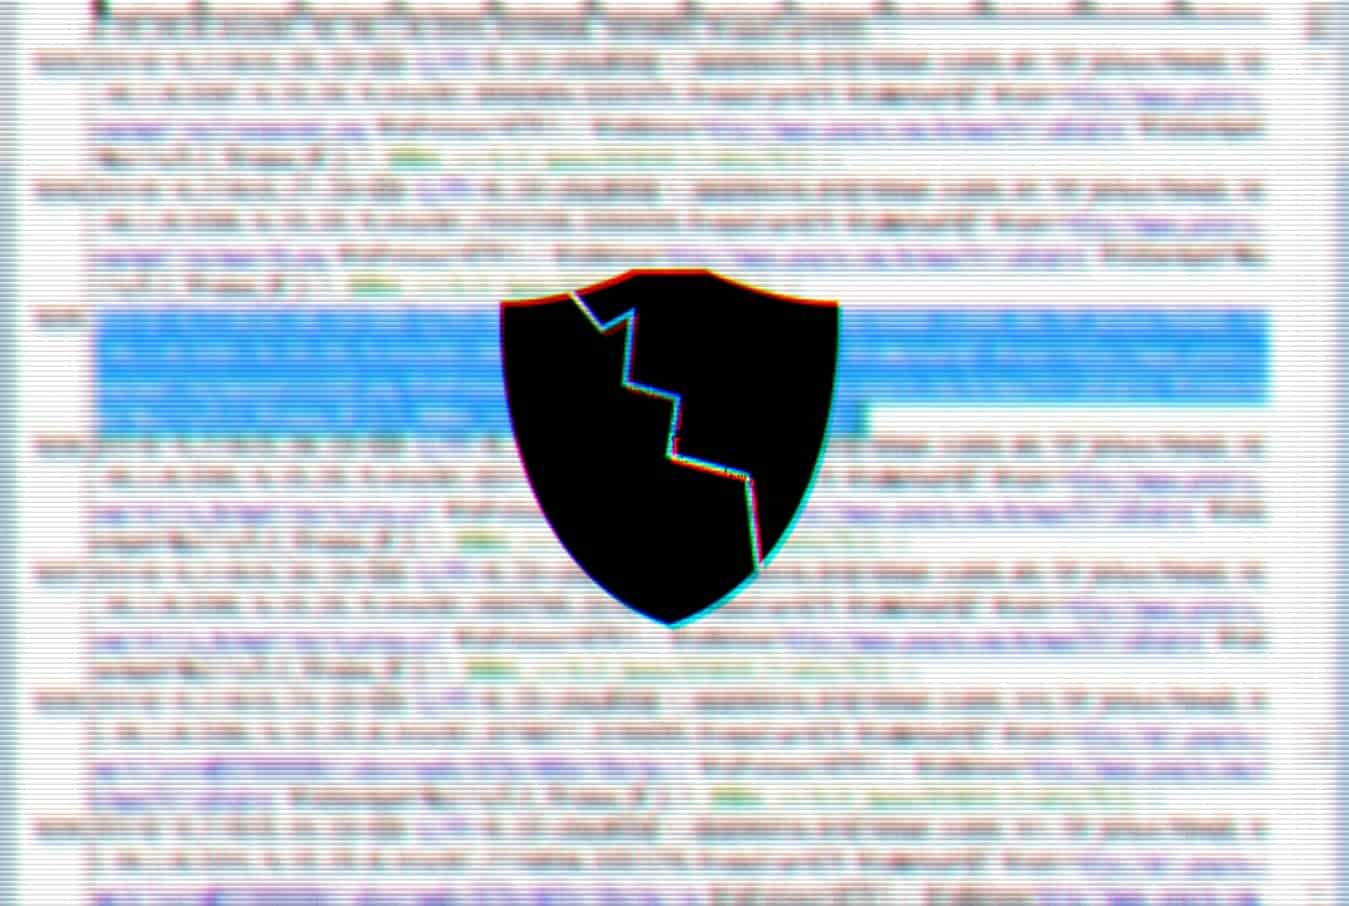 VPN firm that claims zero logs policy leaks 20 million users logs